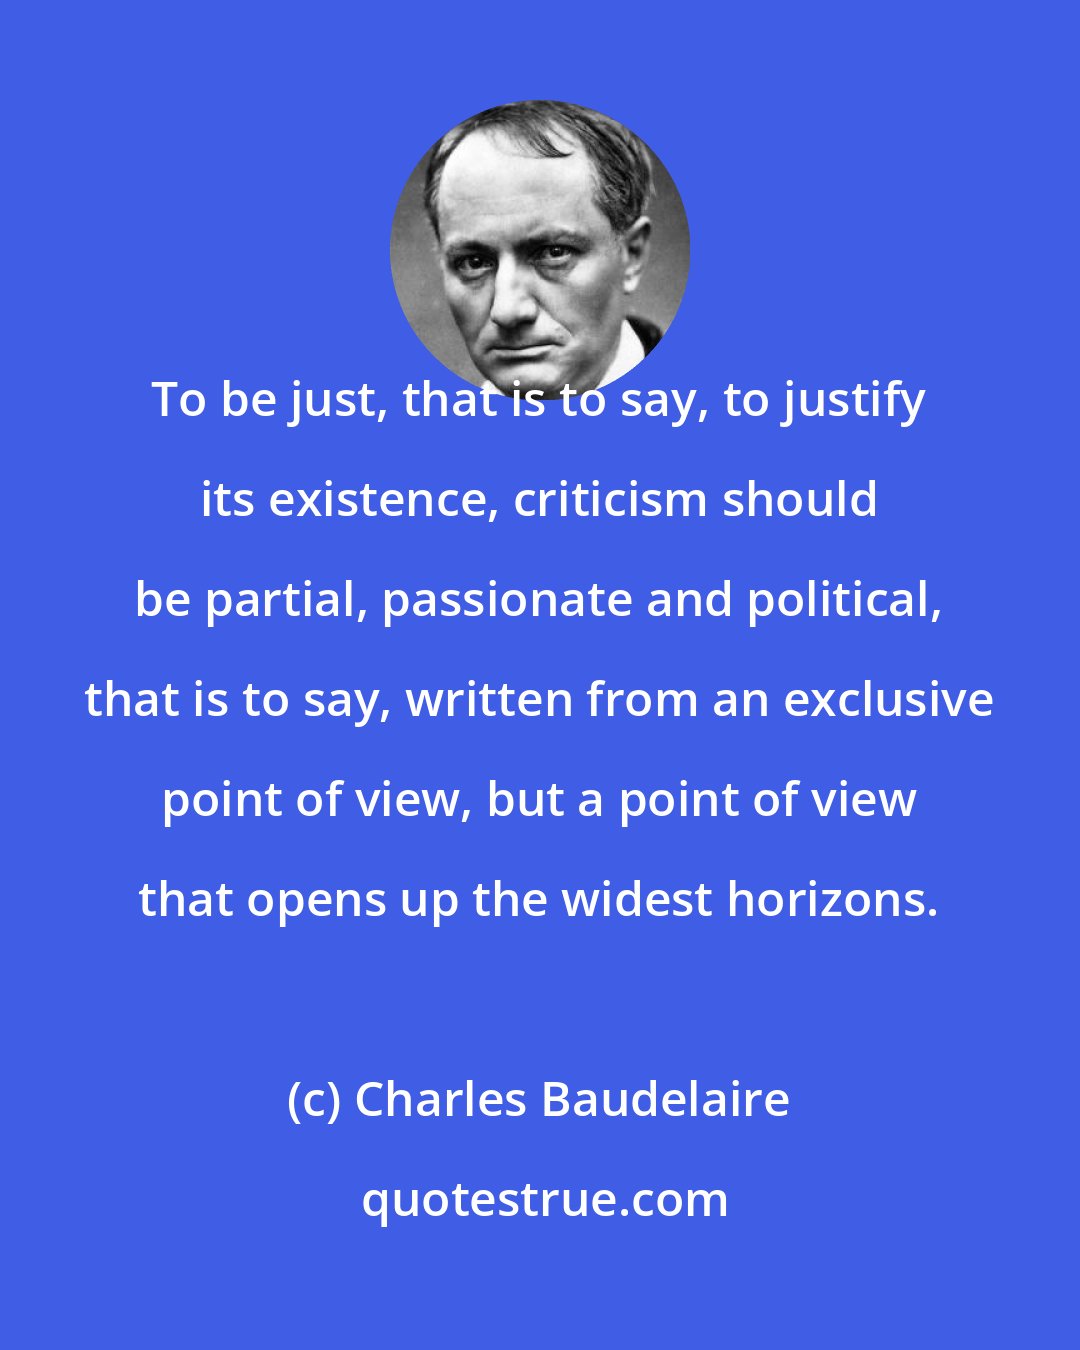 Charles Baudelaire: To be just, that is to say, to justify its existence, criticism should be partial, passionate and political, that is to say, written from an exclusive point of view, but a point of view that opens up the widest horizons.